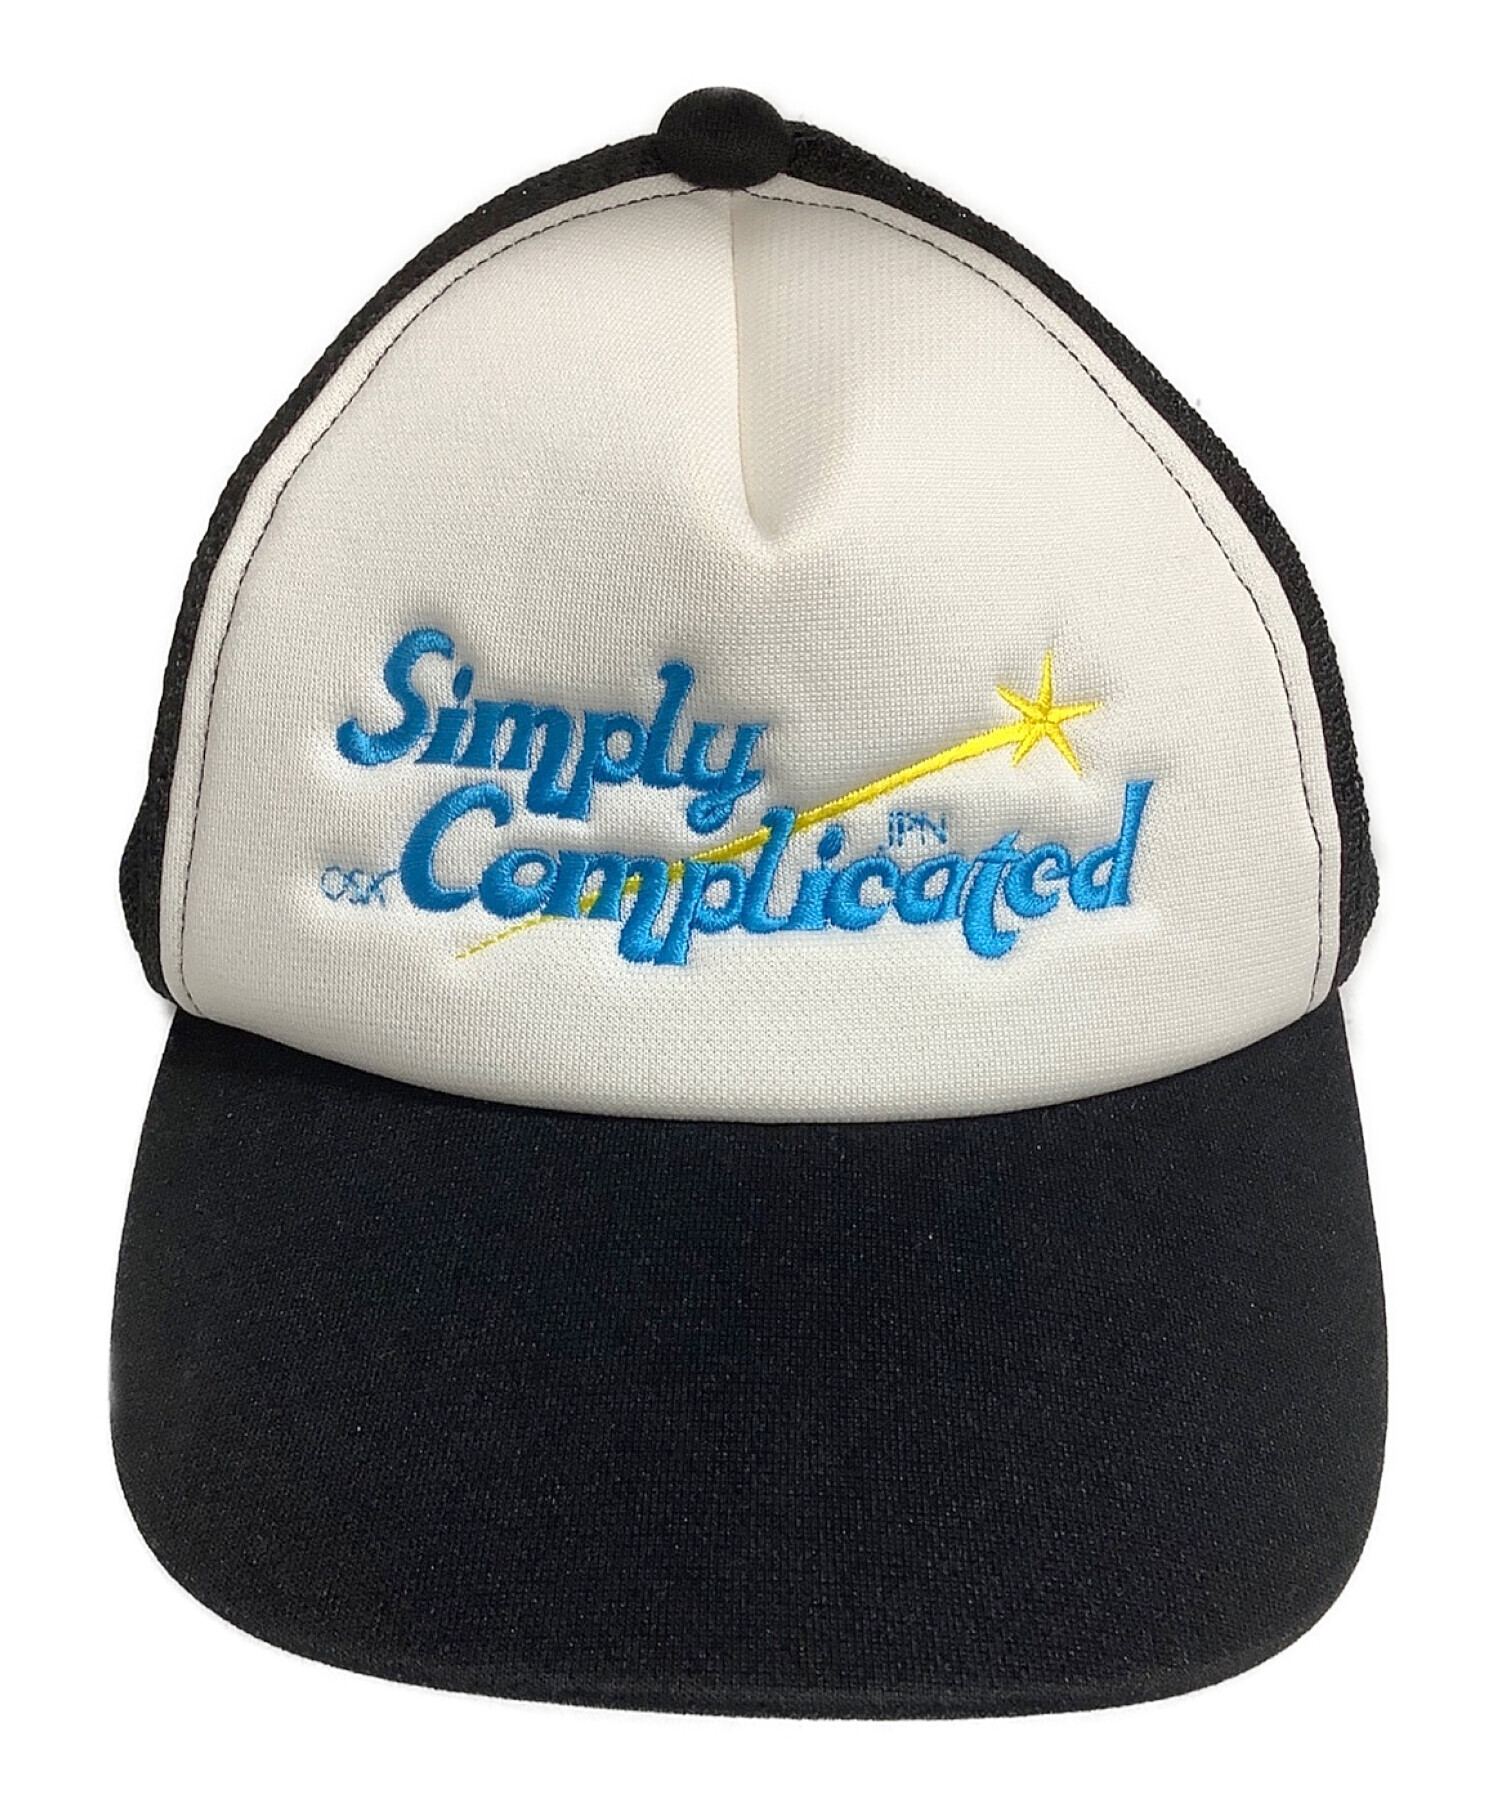 simply complicated キャップ　メッシュキャップ